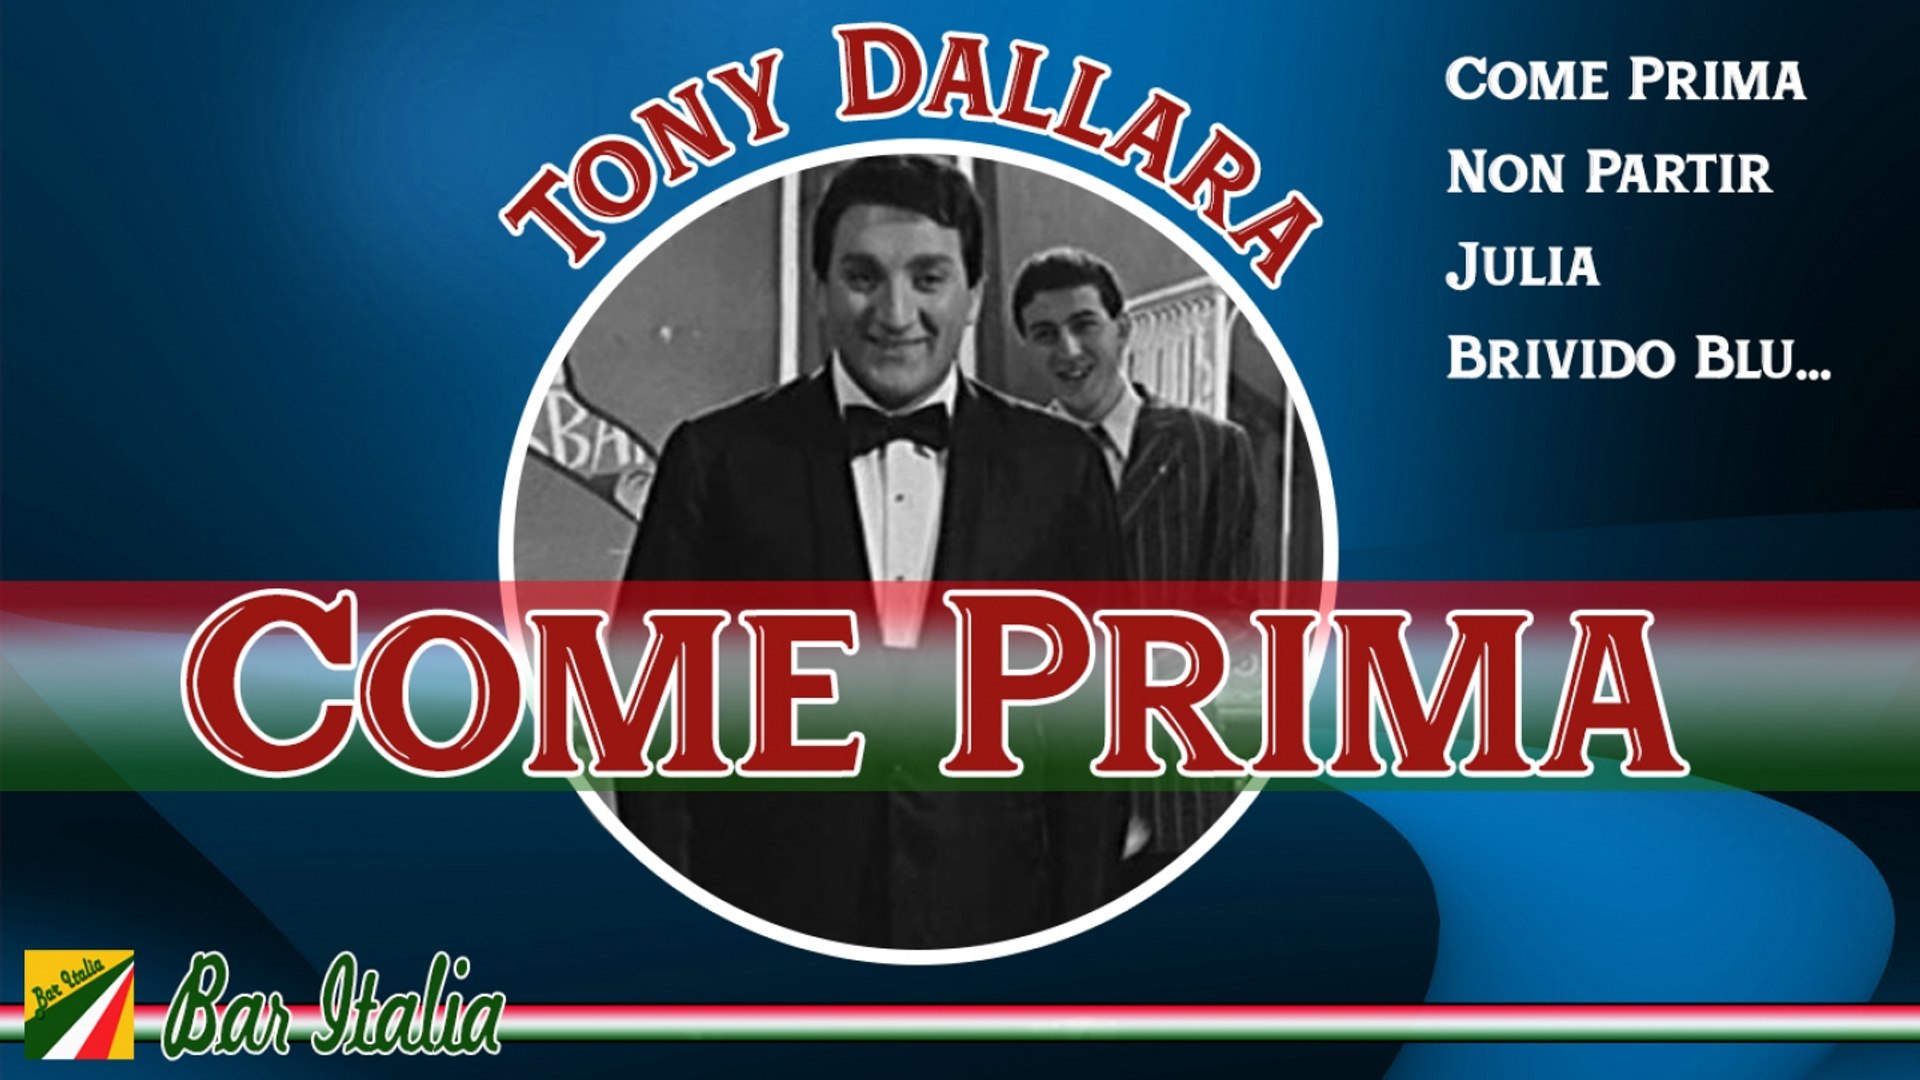 Tony Dallara come prima. Tony Dallara. Tony Dallara – canzone best Star best album. The best Italian Songs Canzona.